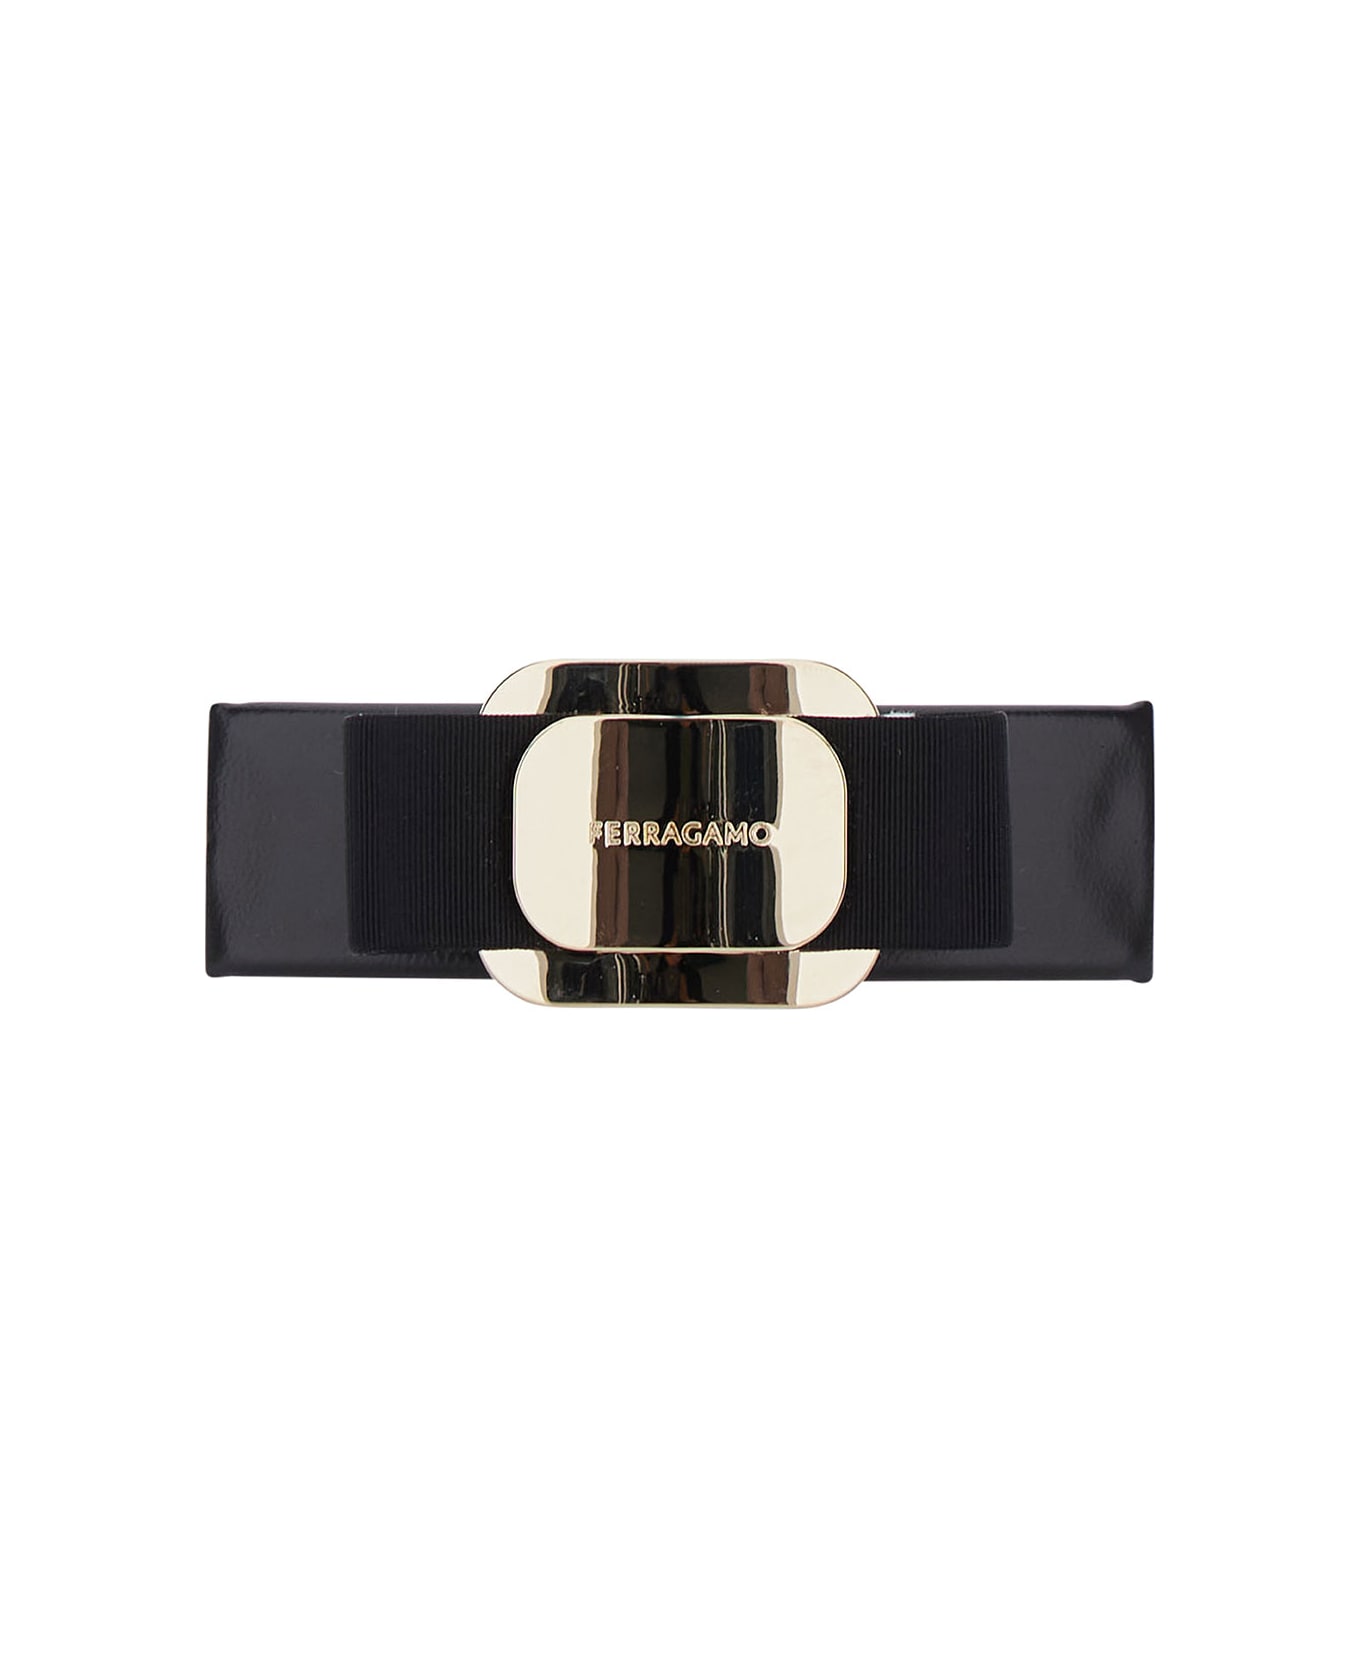 Ferragamo Black Hairclip With Vara Bow In Leather Blend Woman - NERO ブローチ